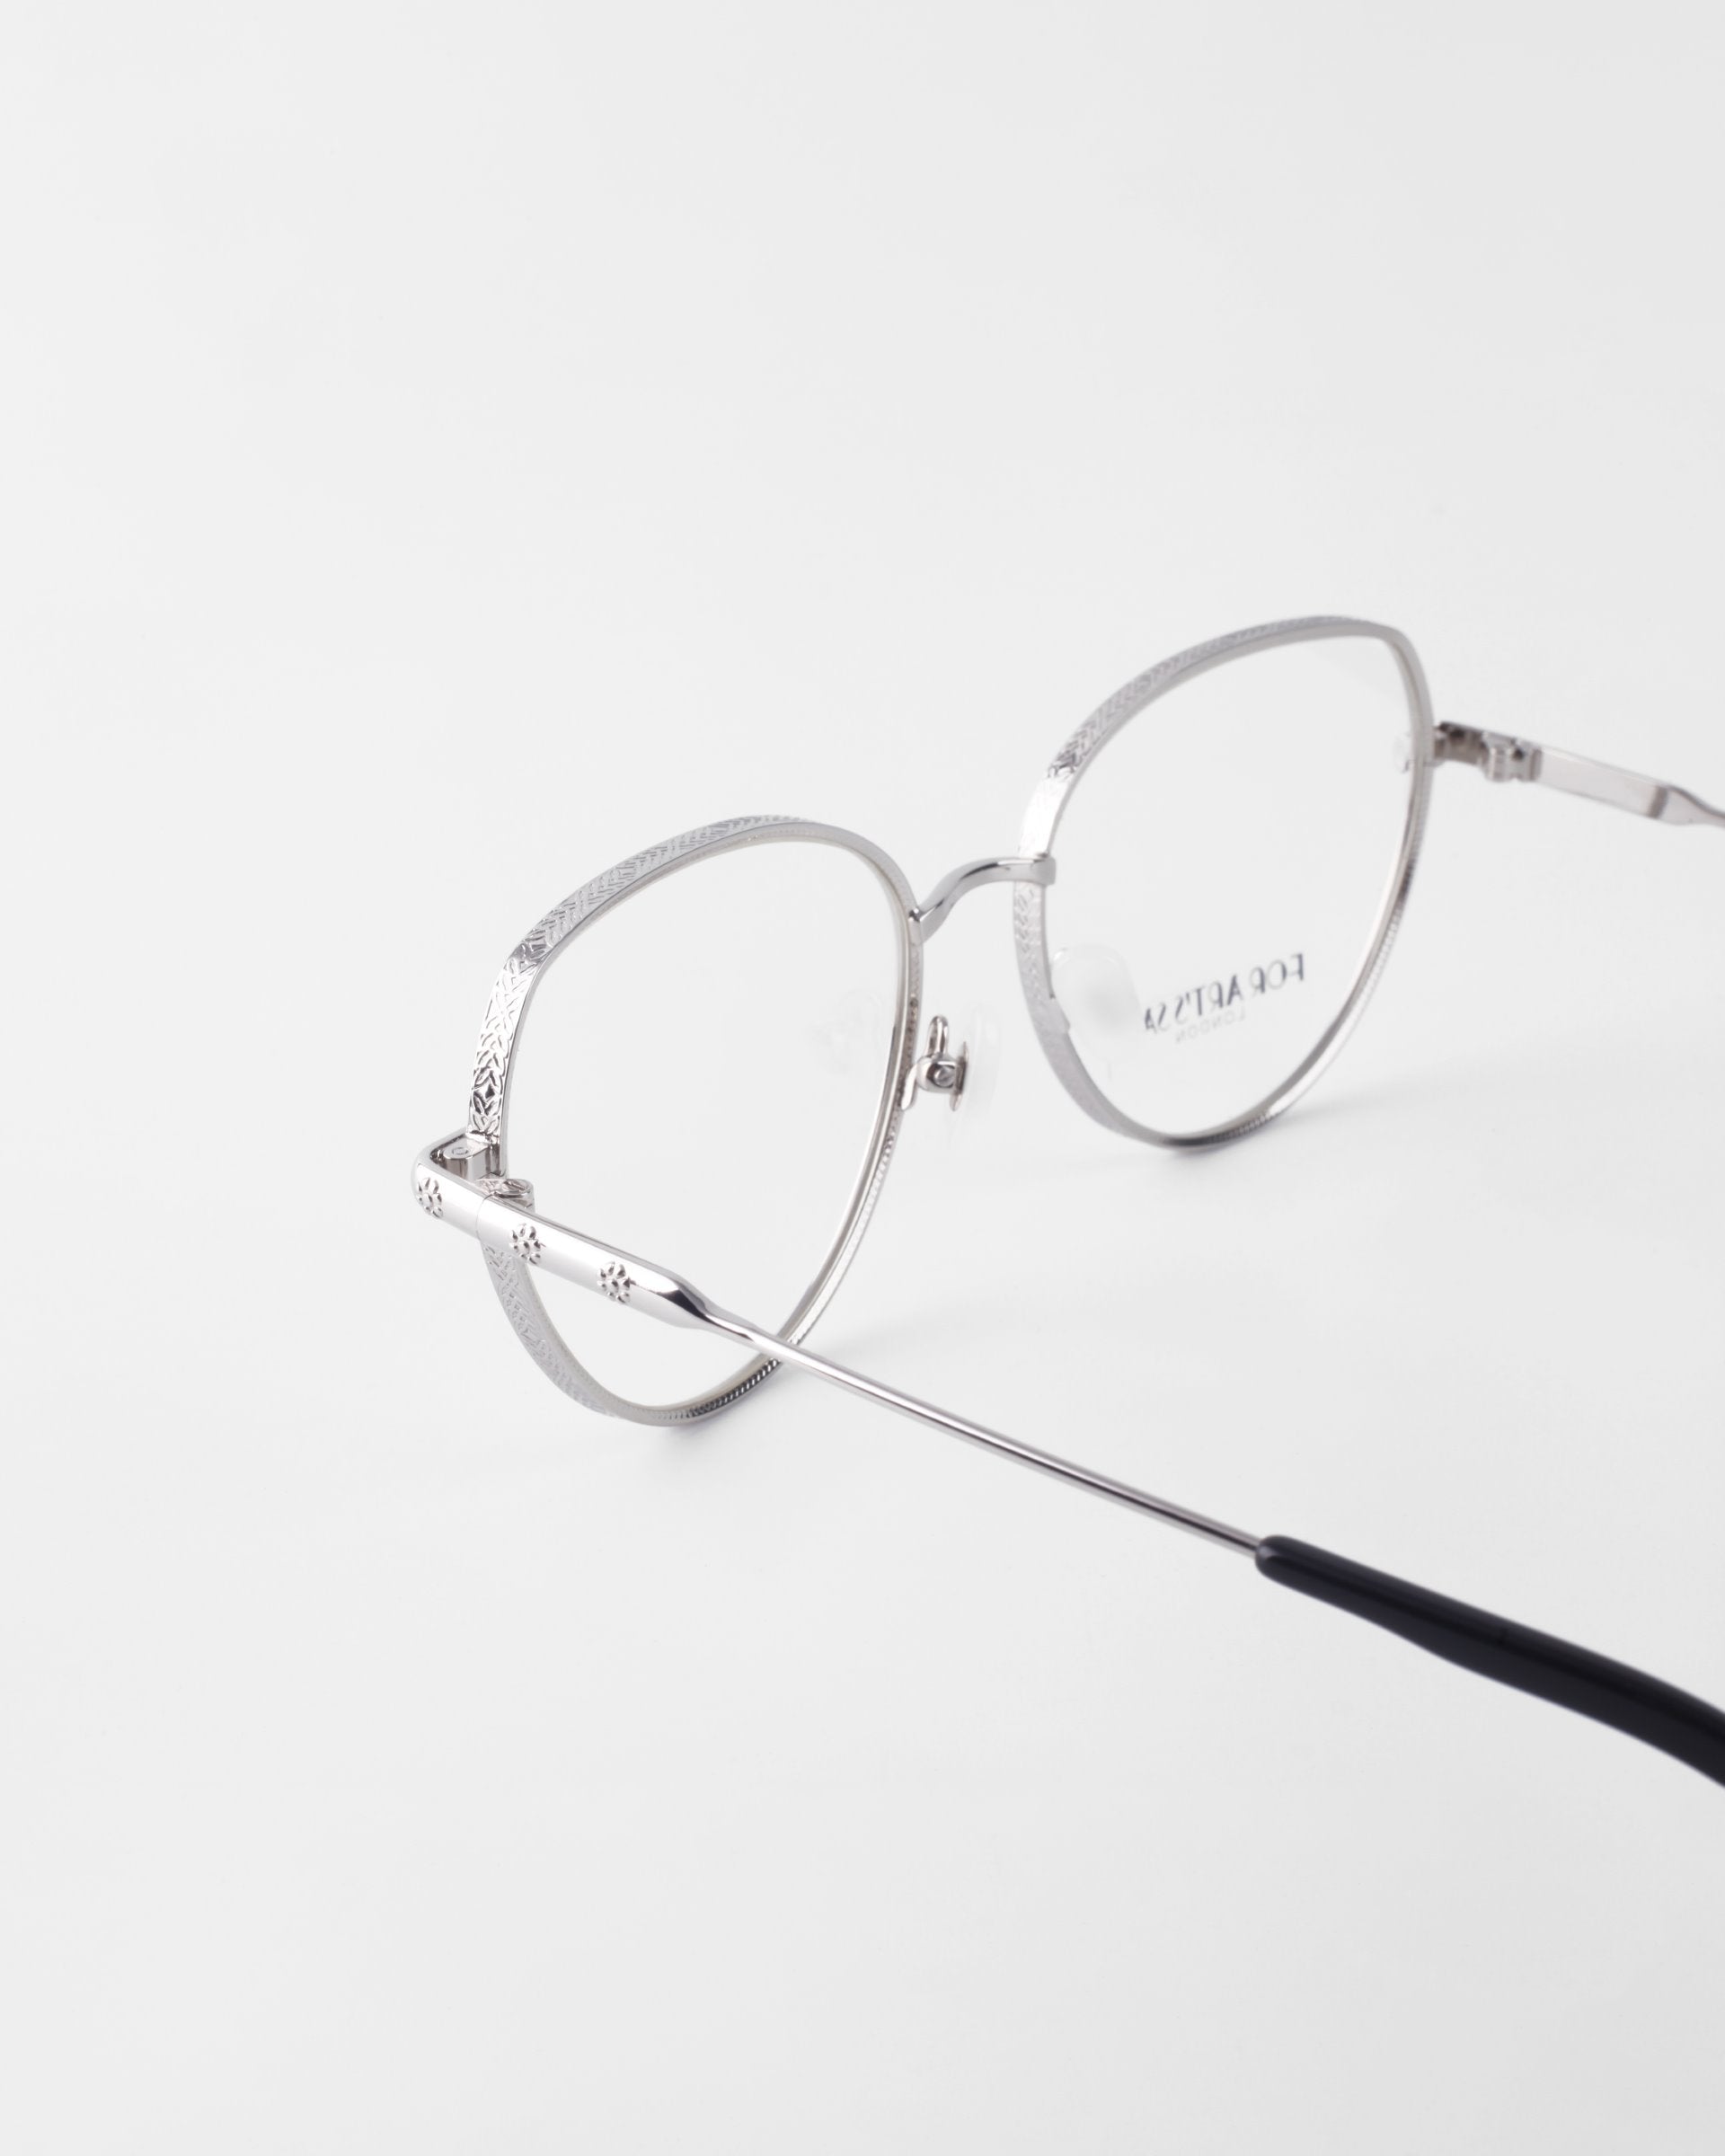 A pair of Frida Floral by For Art&#39;s Sake® rests on a white surface. The straight arm of the glasses extends towards the camera, showcasing a sleek design with a black tip. The brand name is faintly visible on the lens, complemented by an 18-karat gold-plated frame.